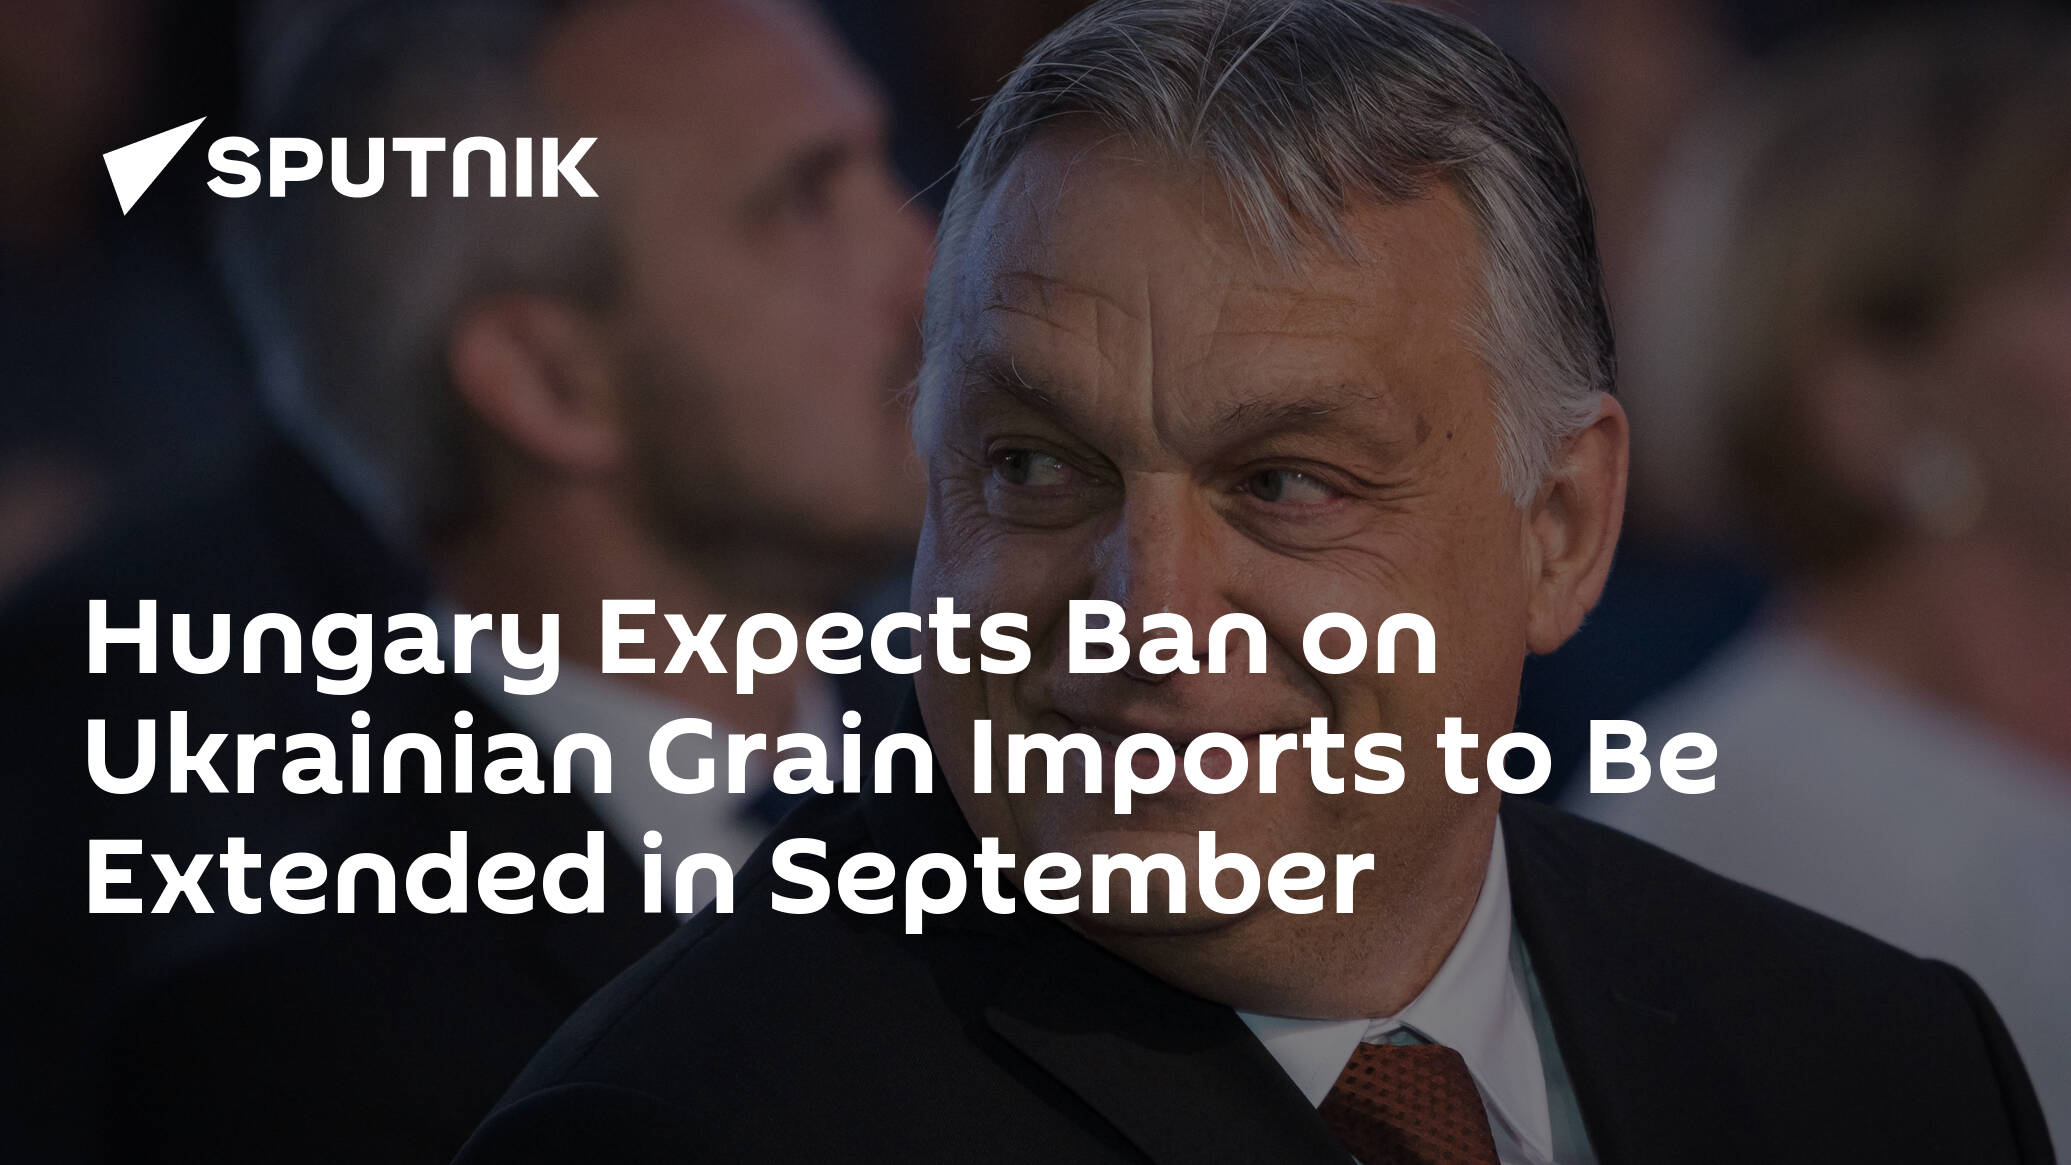 Hungary Expects Ban on Ukrainian Grain Imports to Be Extended in September